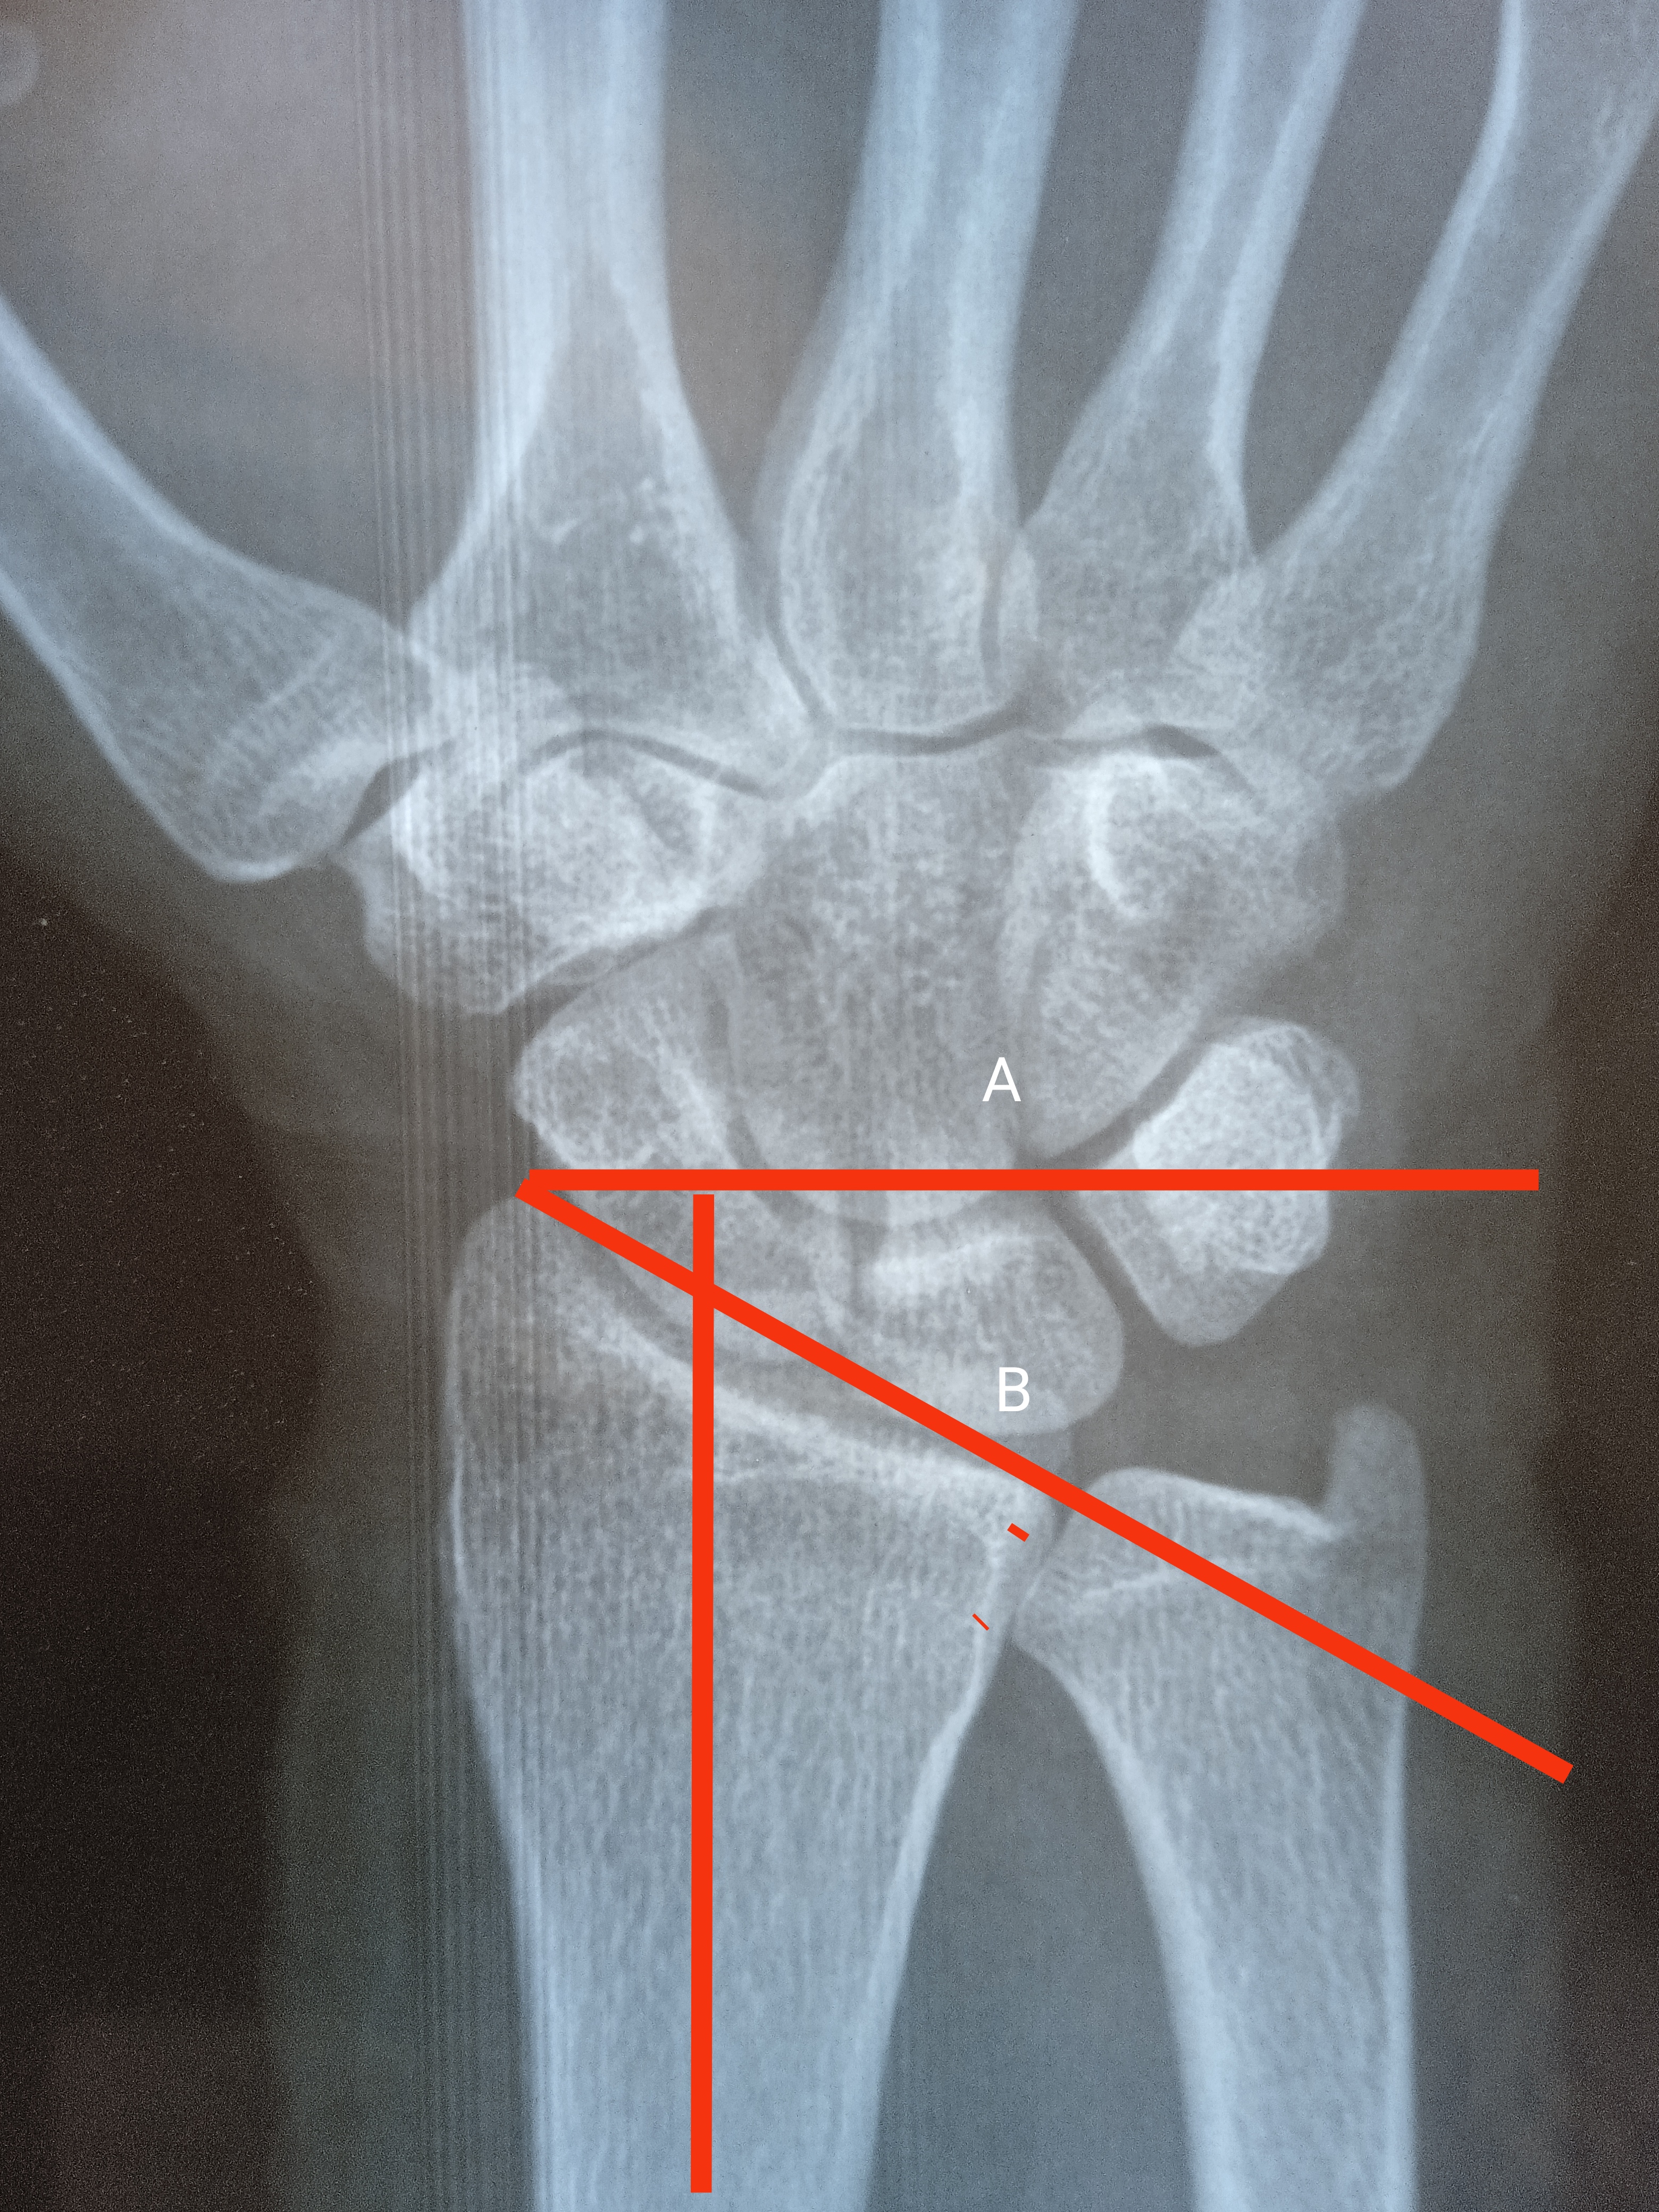 Radial Inclination Angle:
Line A is perpendicular to long axis of radius while line B connects radial and ulnar articular surface of distal radius